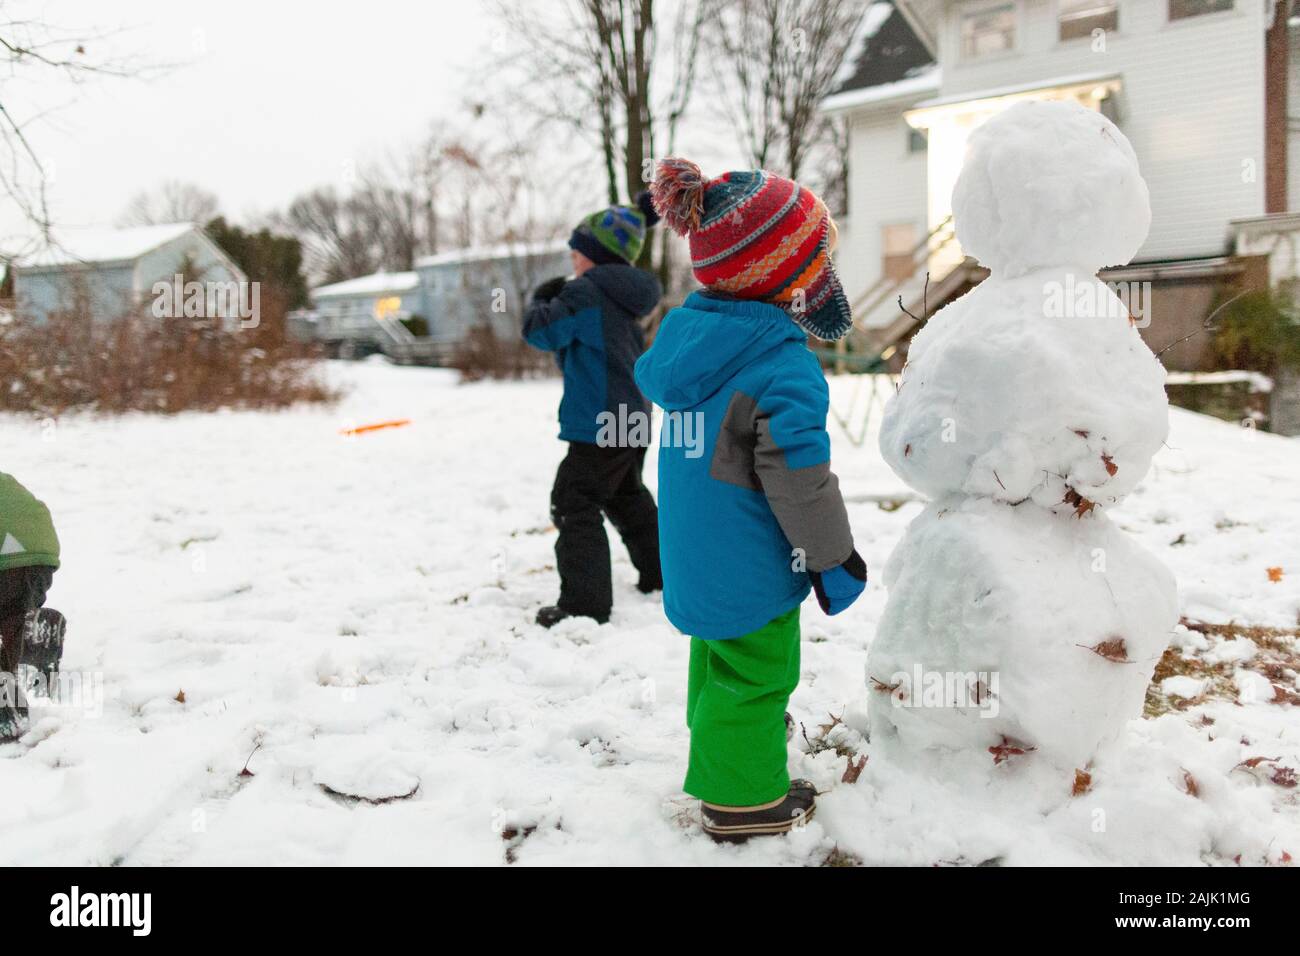 Preschool age boy stands next to snowman while brothers play in snow Stock Photo